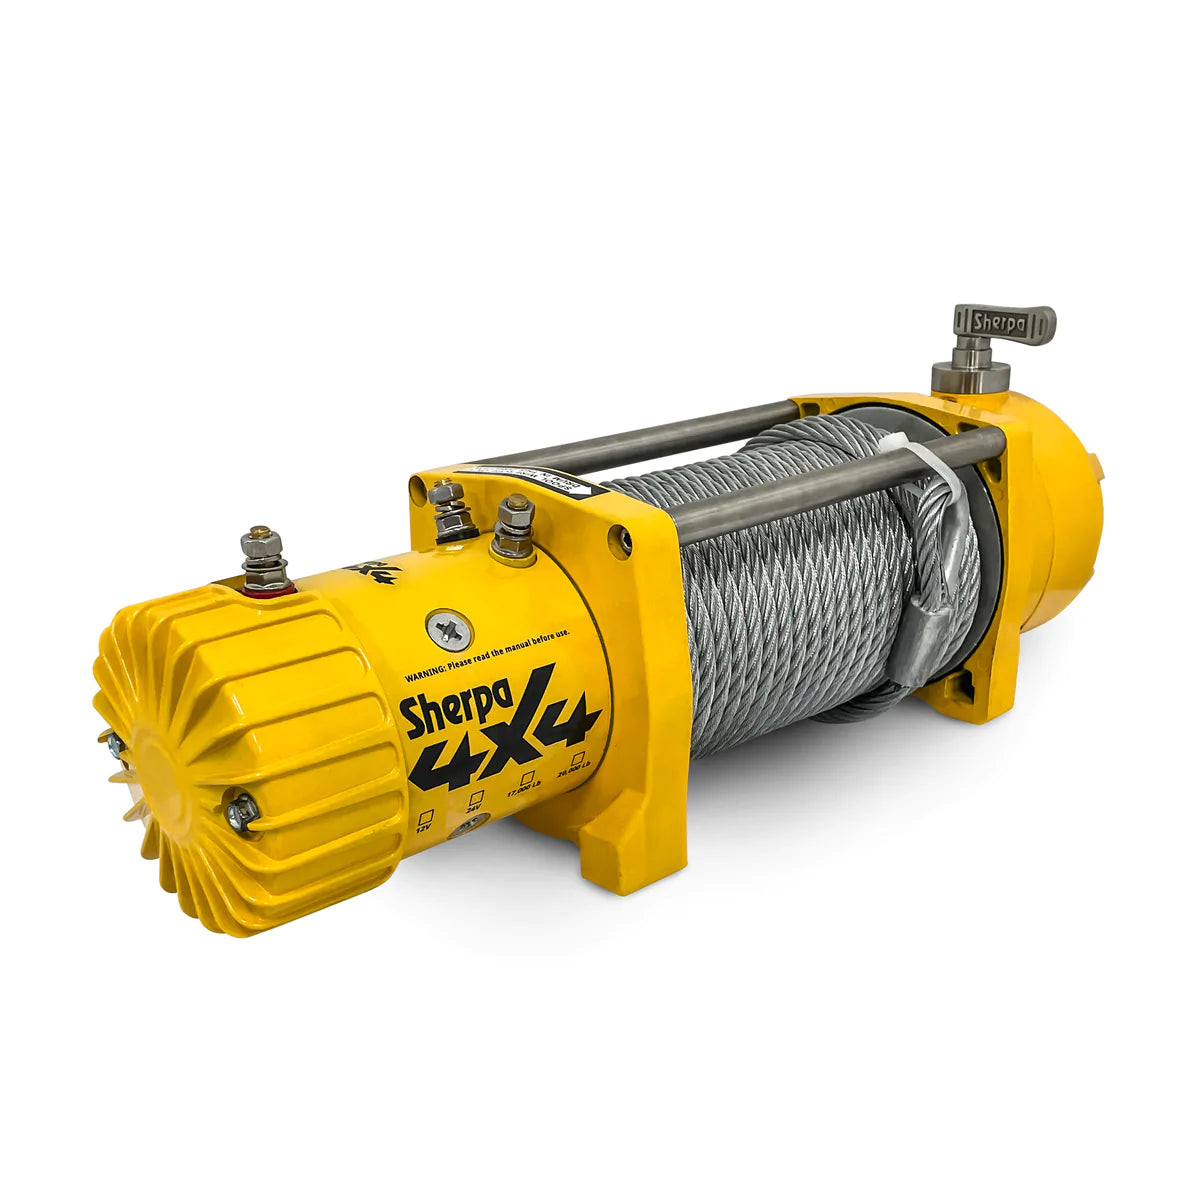 'THE BRUMBY' - 10,000LB HIGH SPEED WINCH